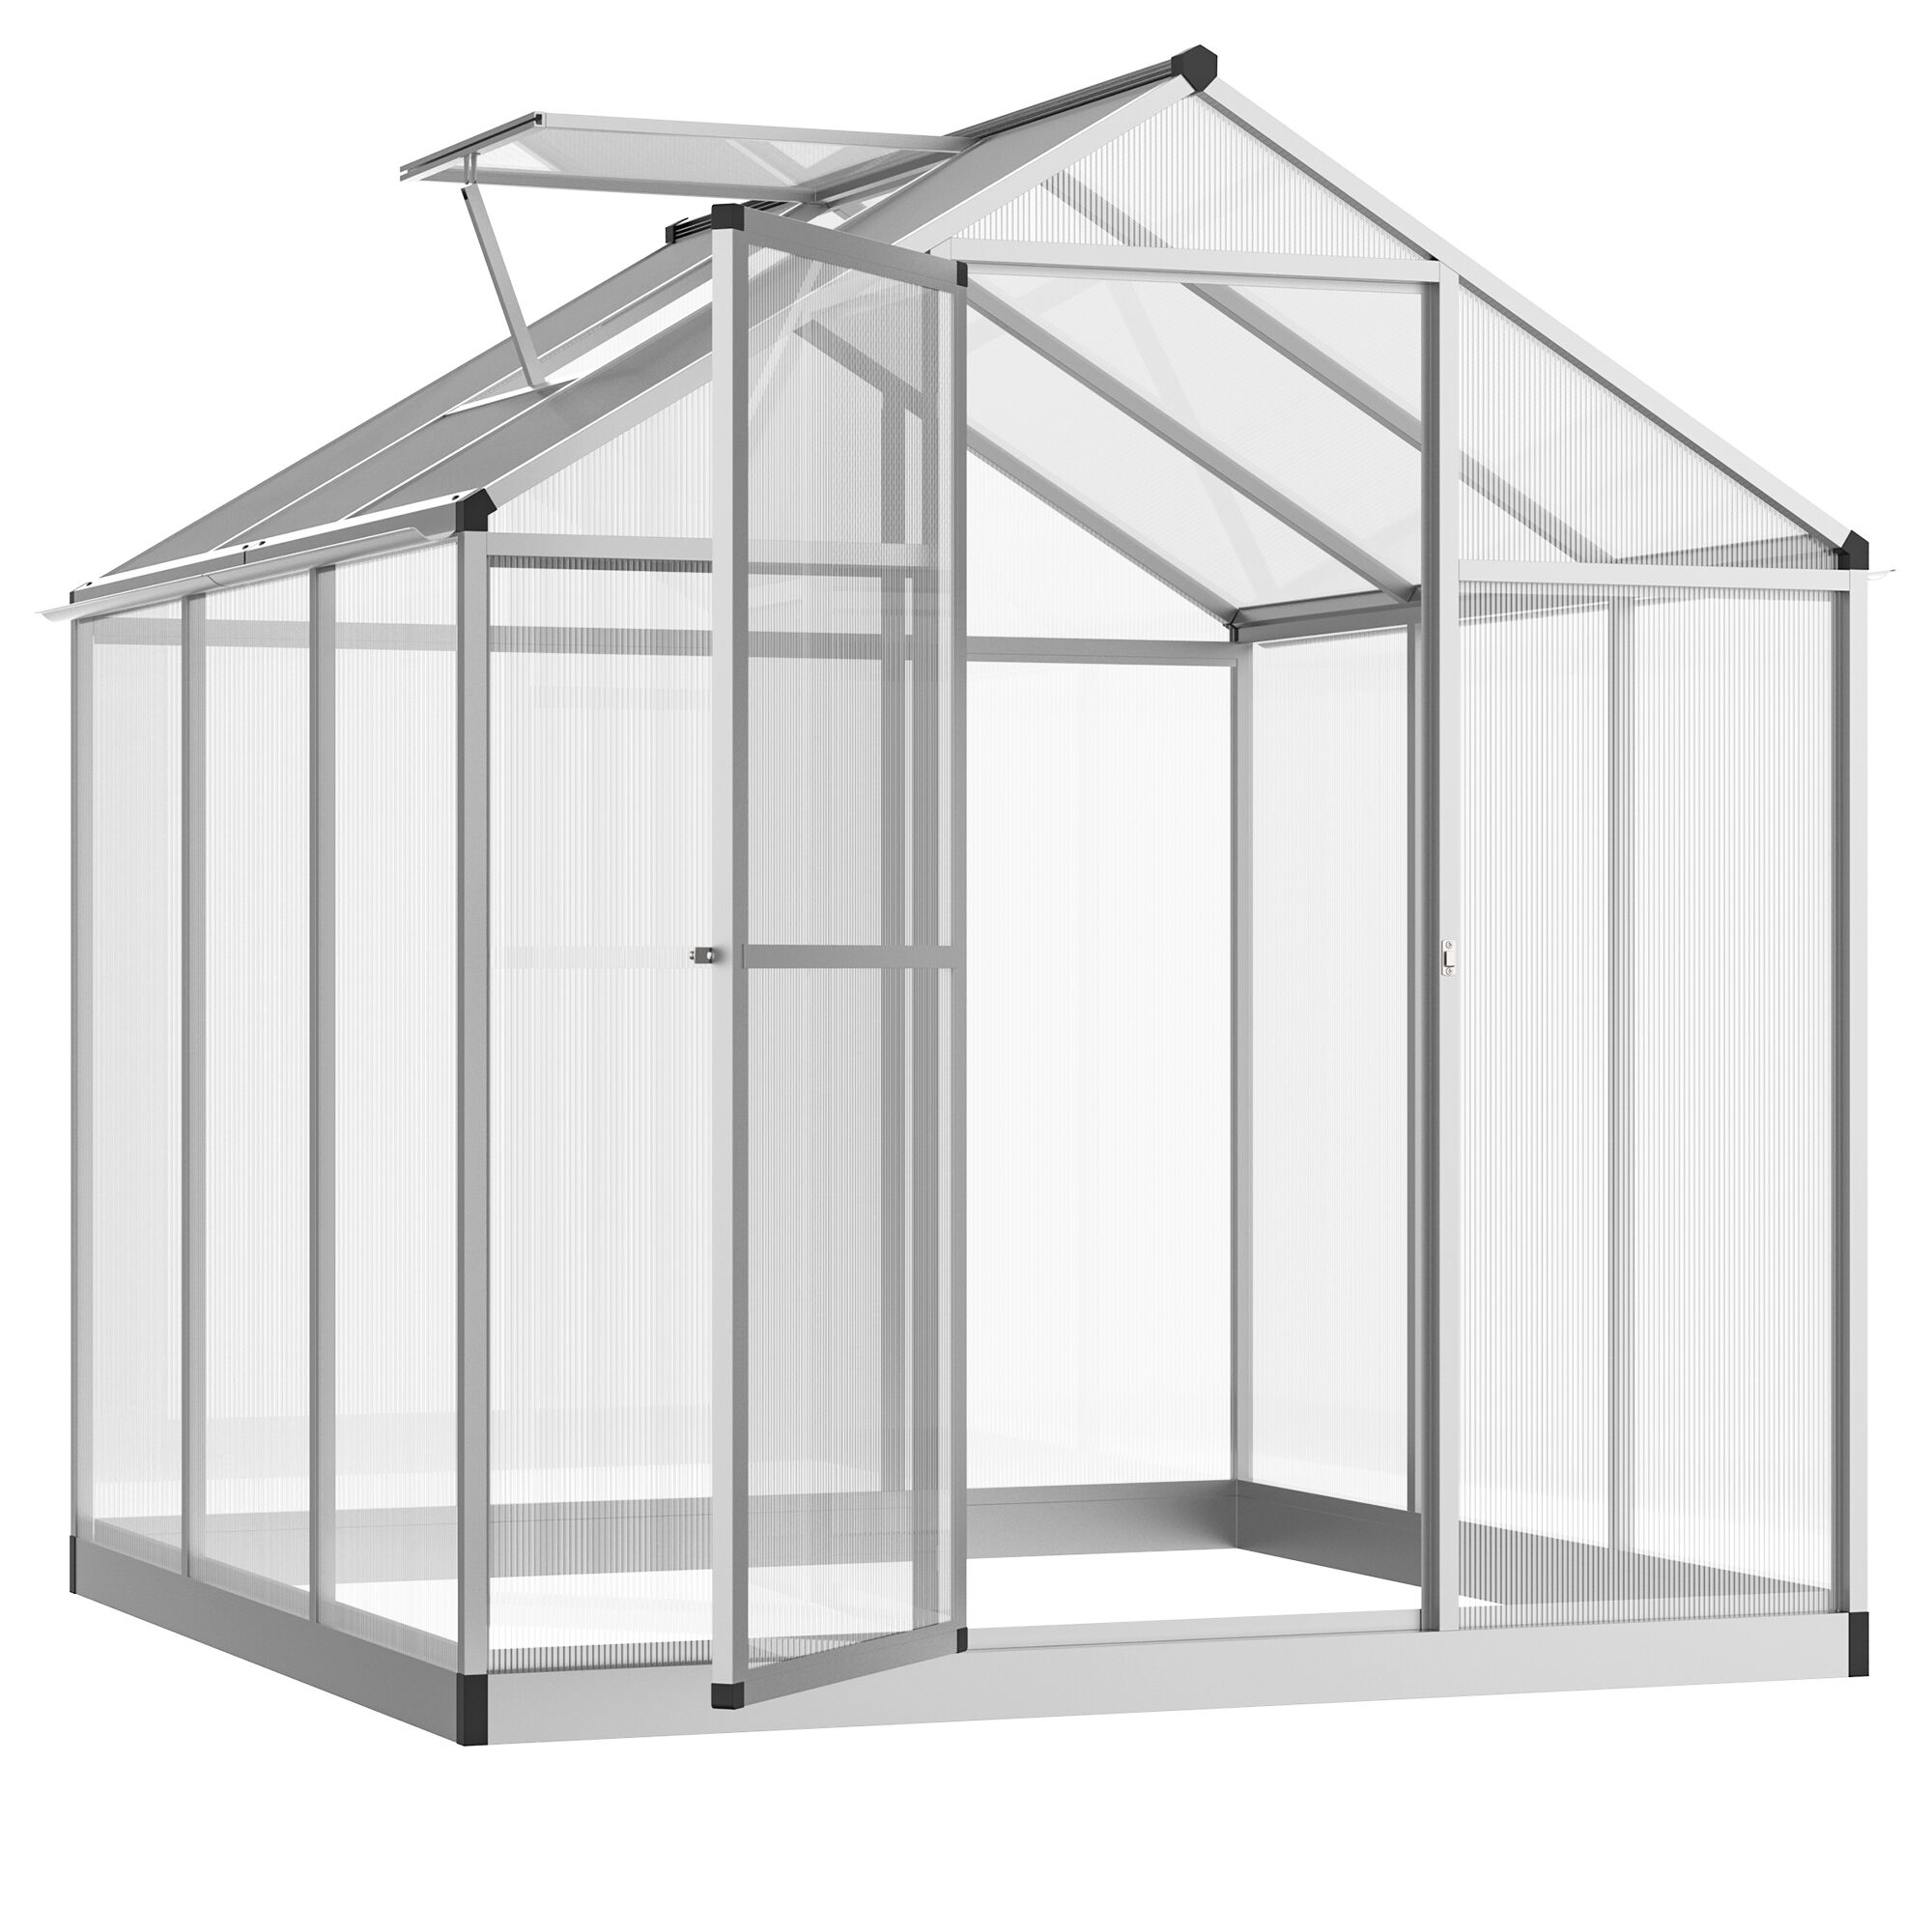 Outsunny 6' L x 6' W Walk-In Polycarbonate Greenhouse with Roof Vent for Ventilation & Rain Gutter, Hobby Greenhouse for Winter, Clear